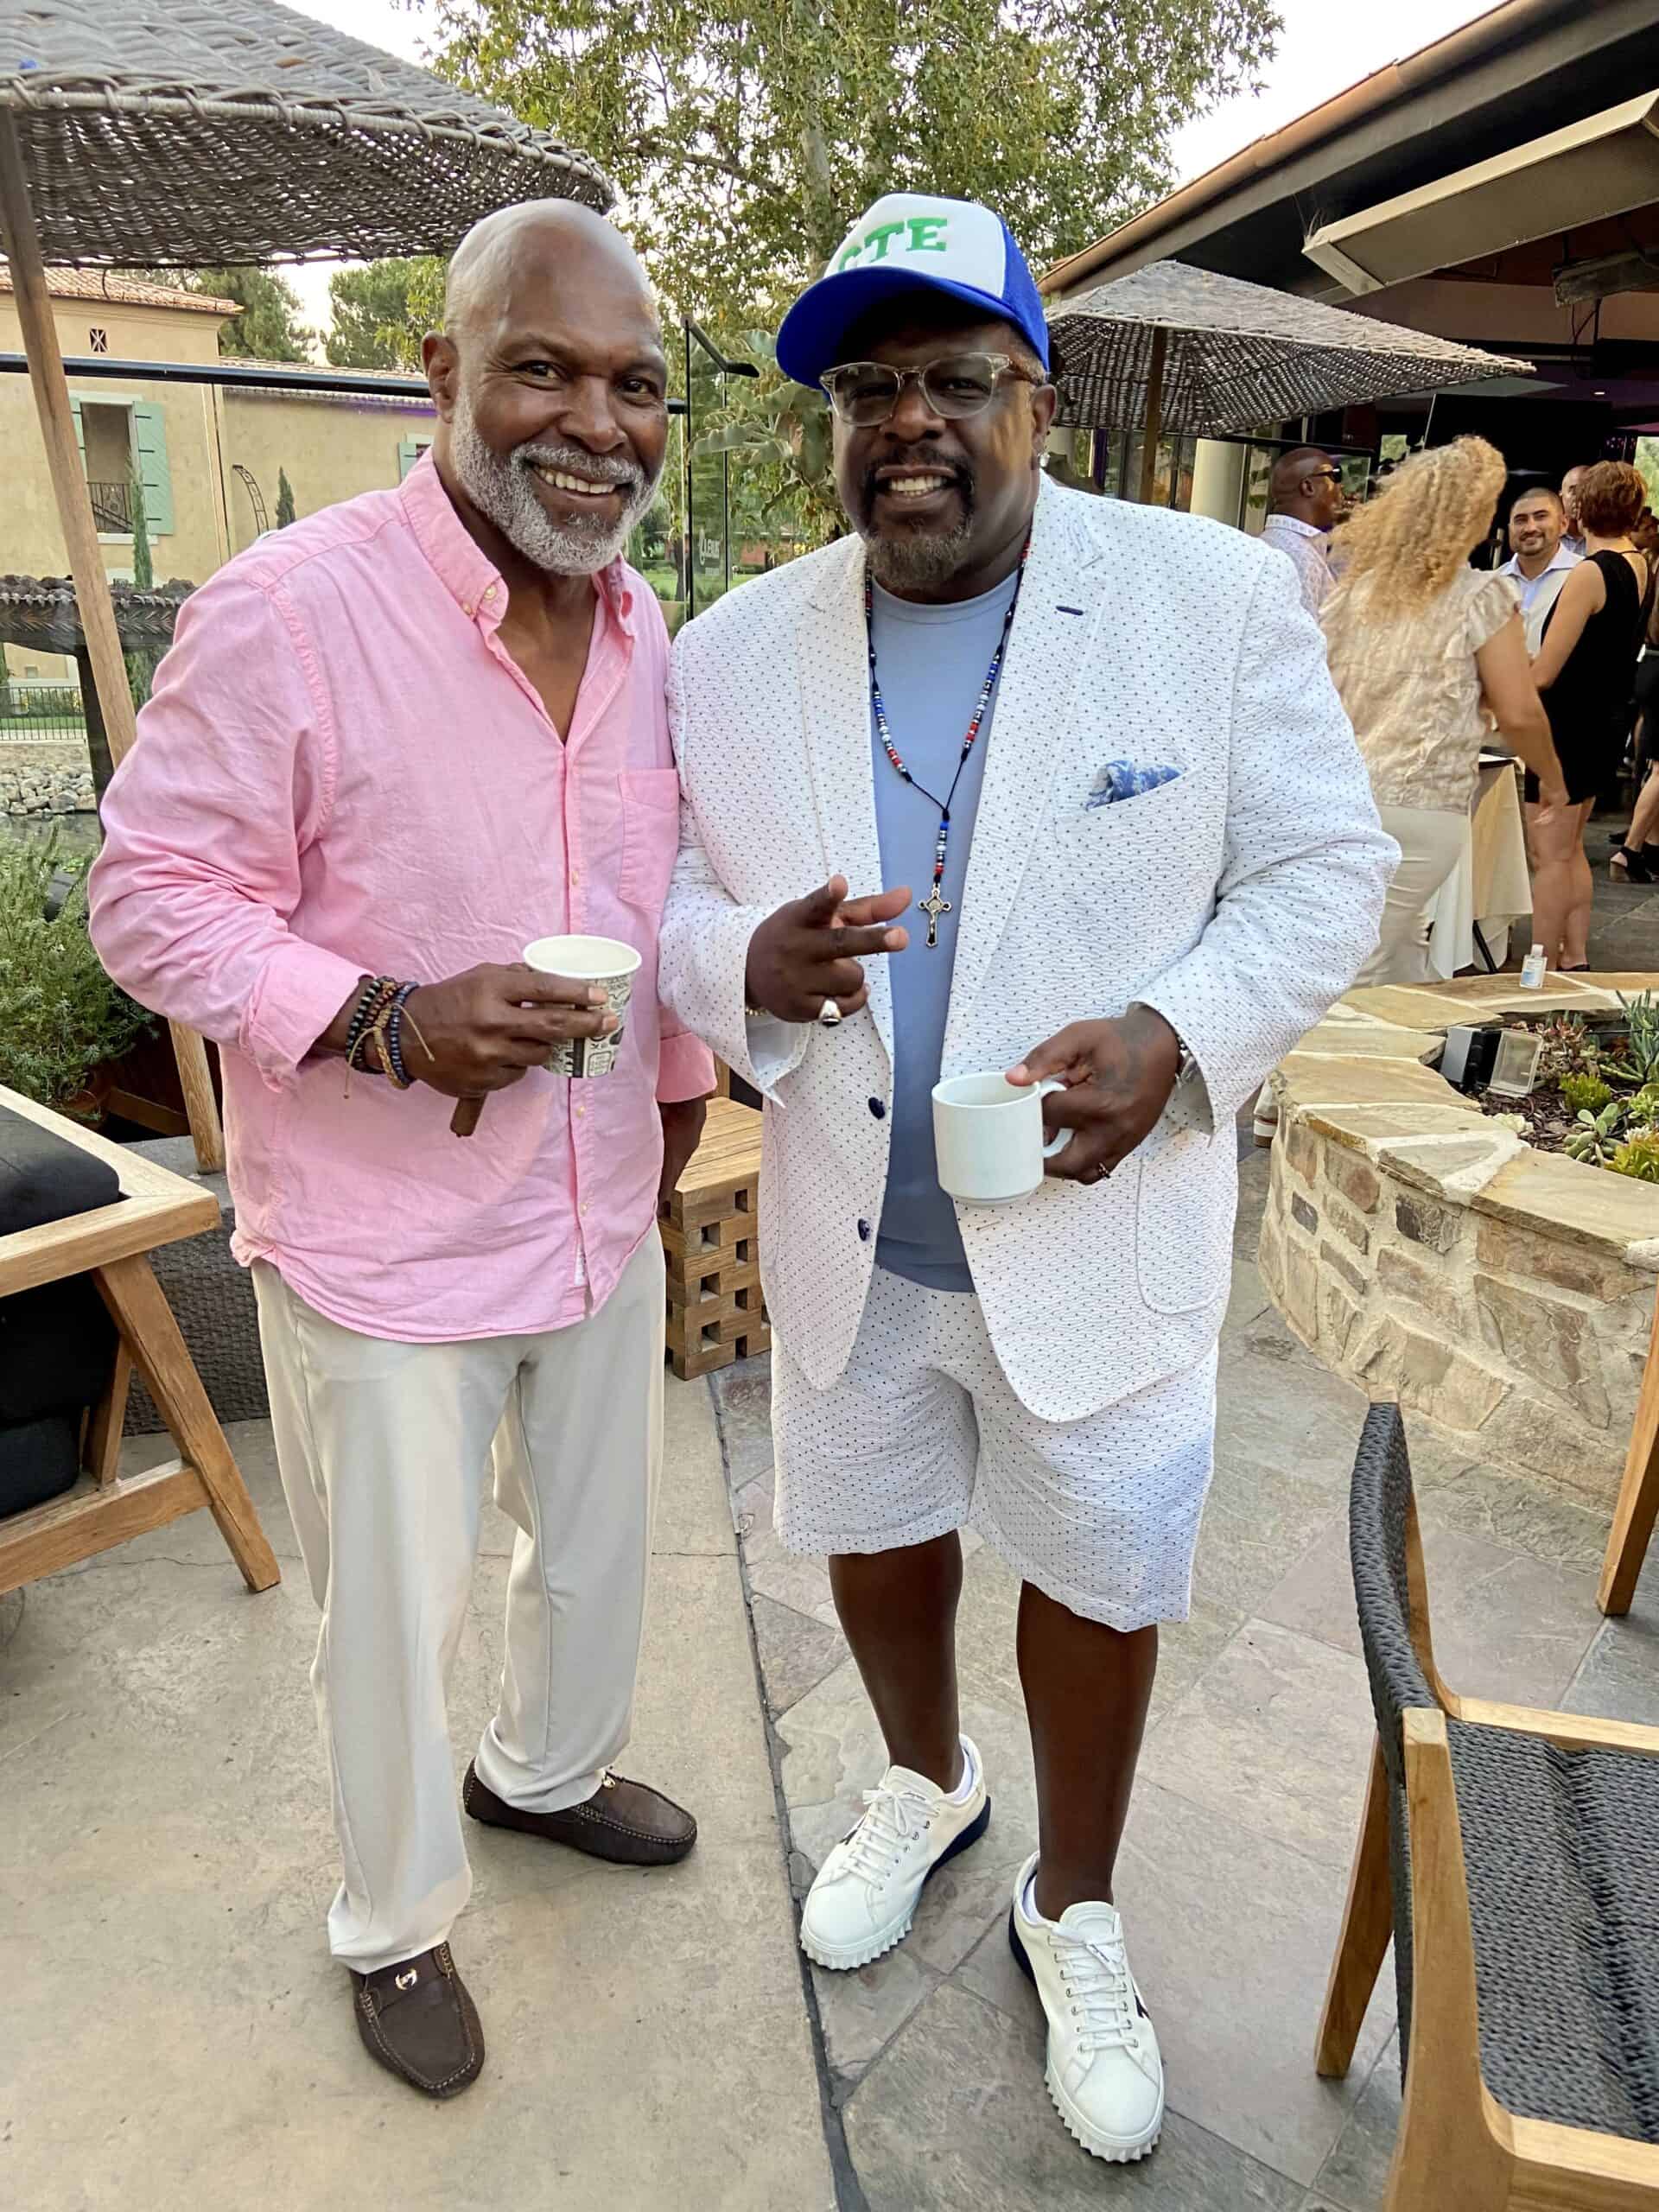 Pet Shaw with Cedric the Entertainer at his annual Golf Tournament 2021